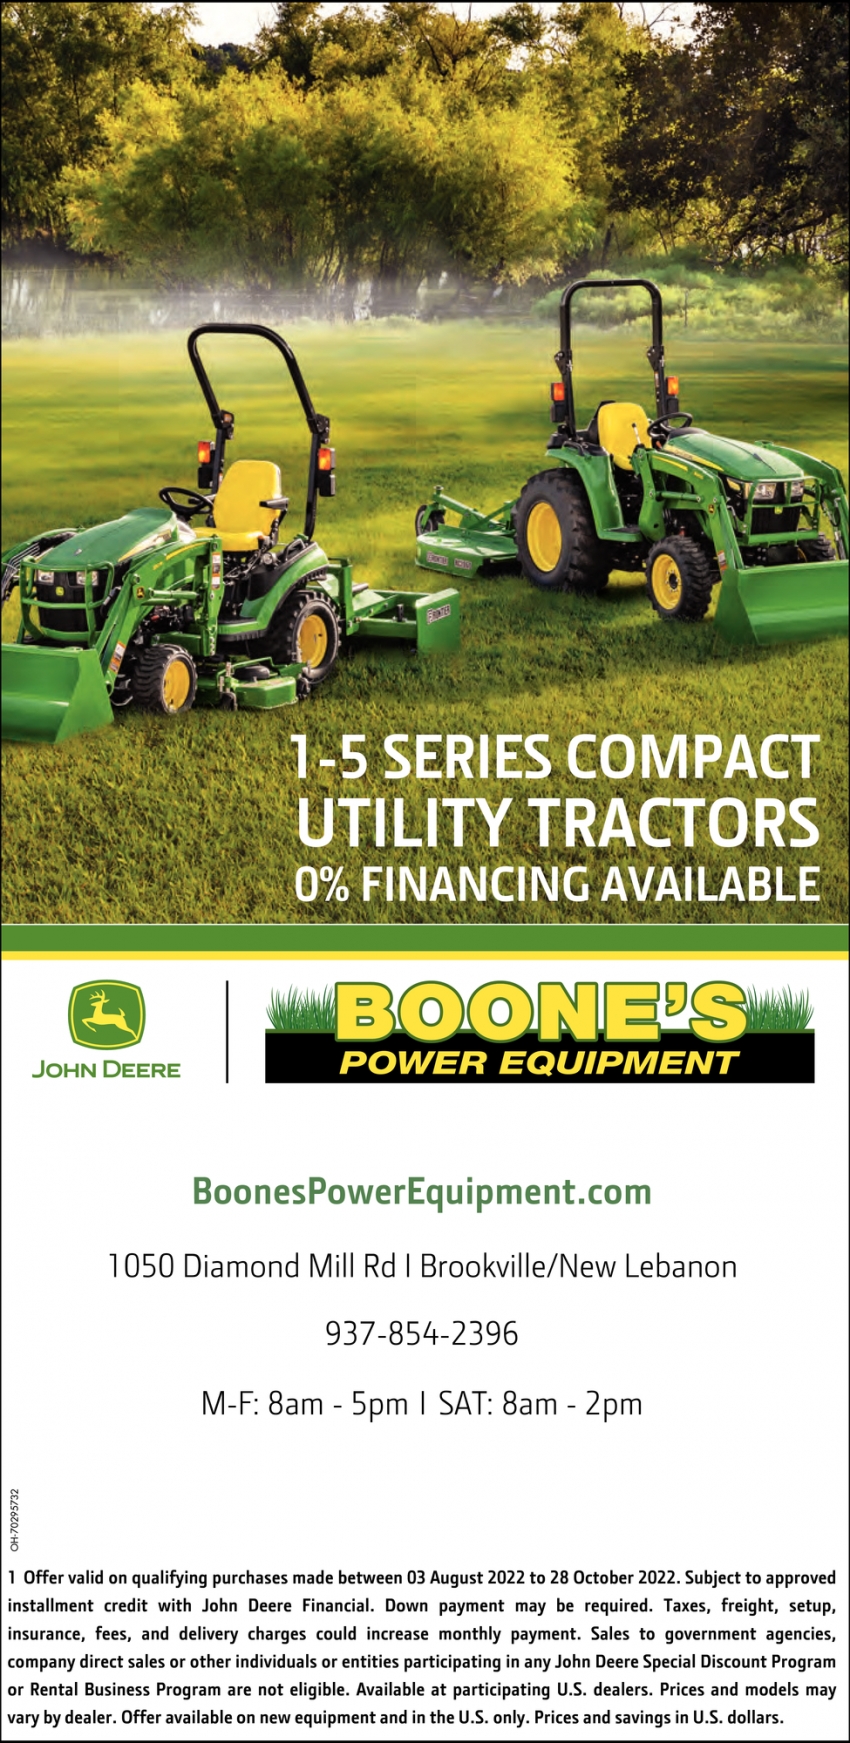 1-5 Series Compact Utility Tractors